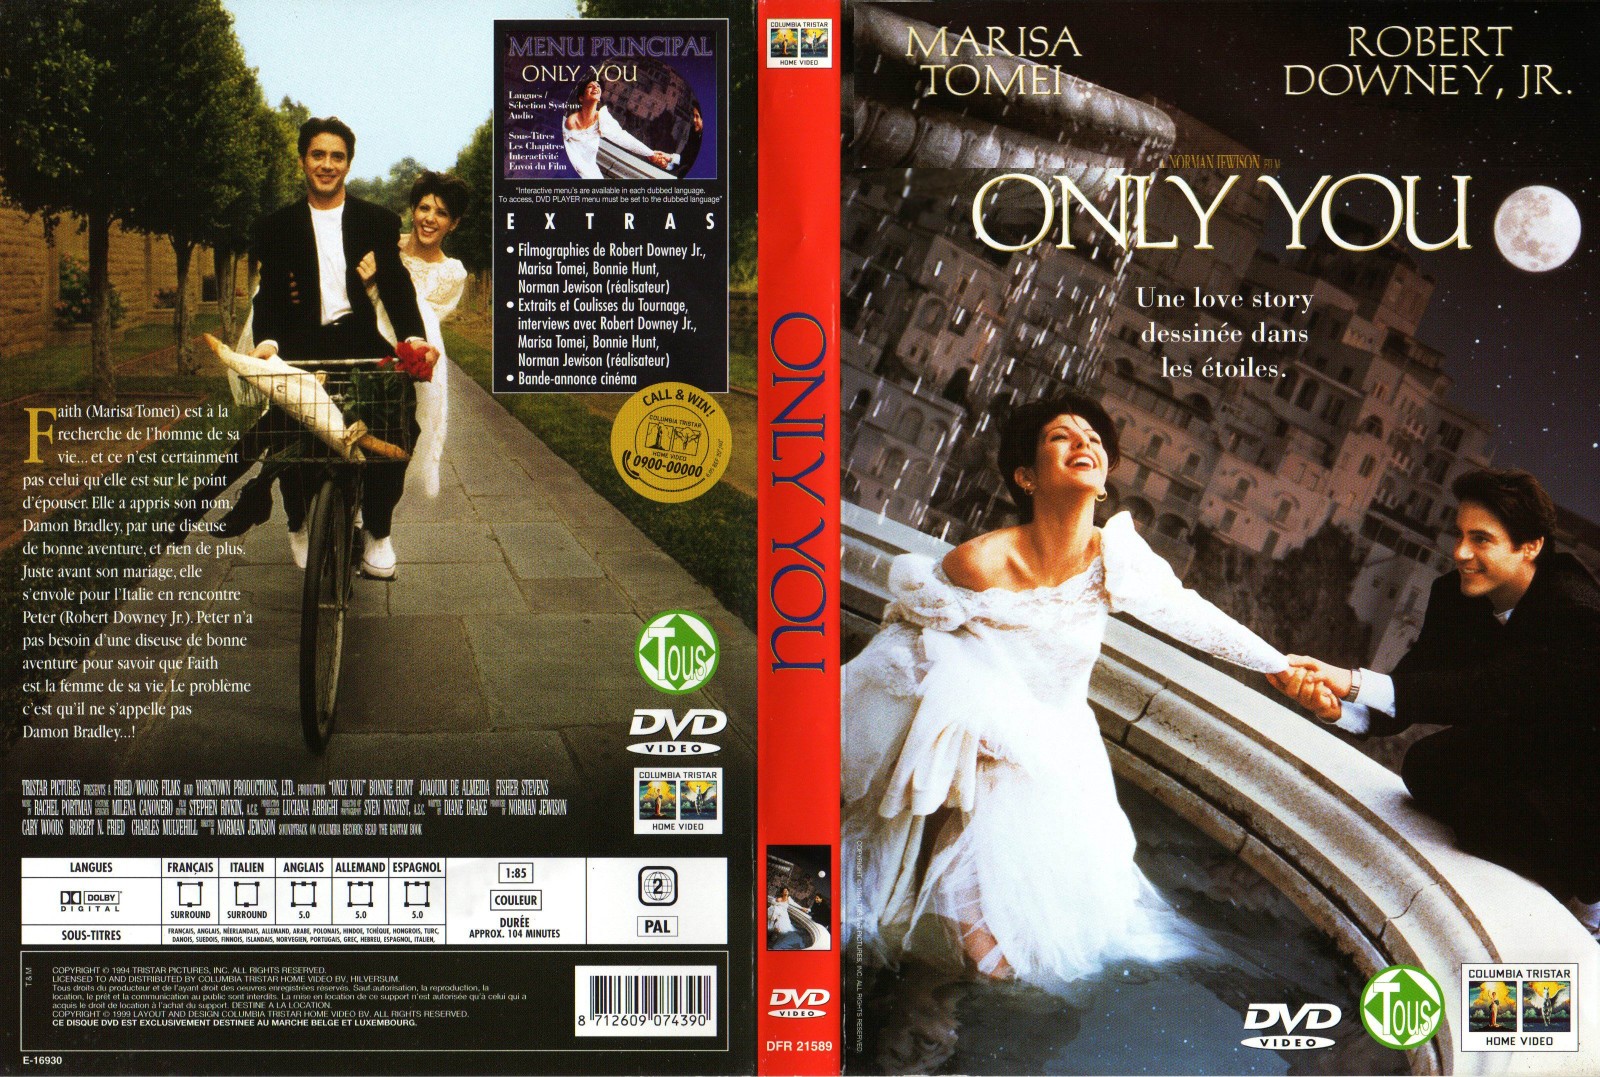 Jaquette DVD Only you